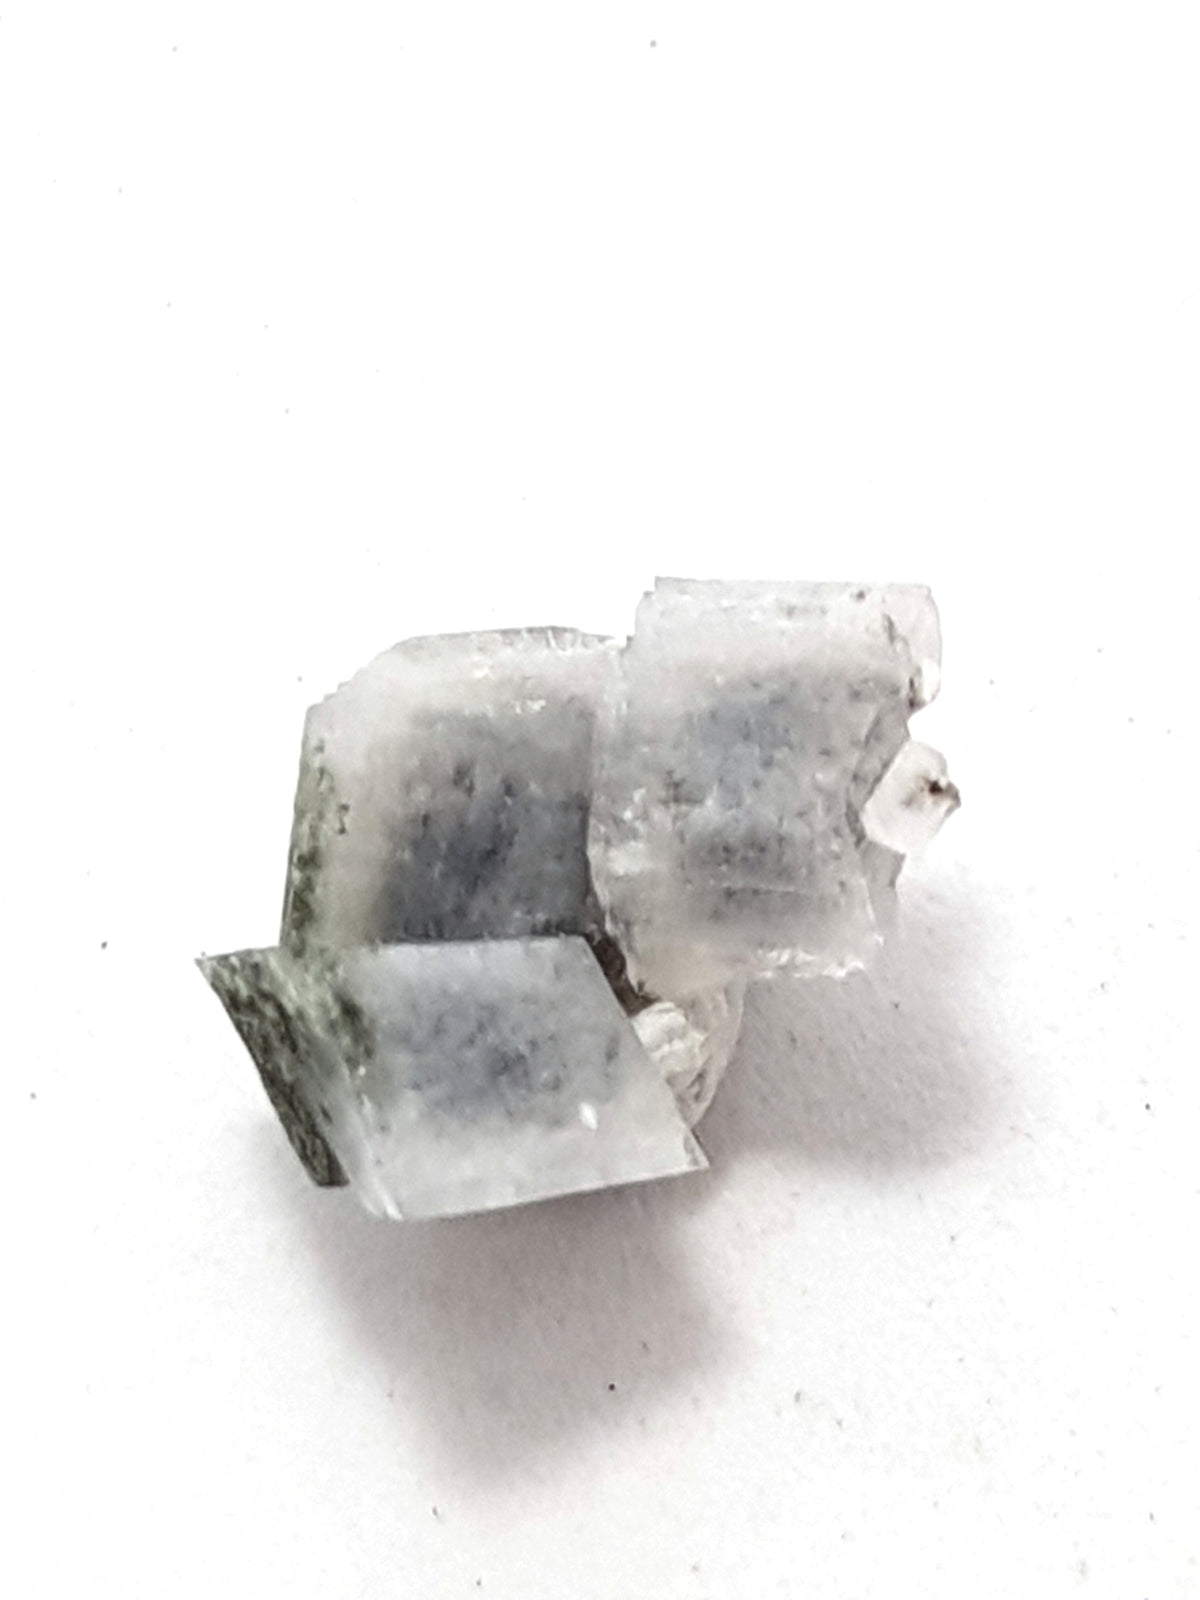 adularia crystals. There are three in a cluster. They are white. They are rhombic